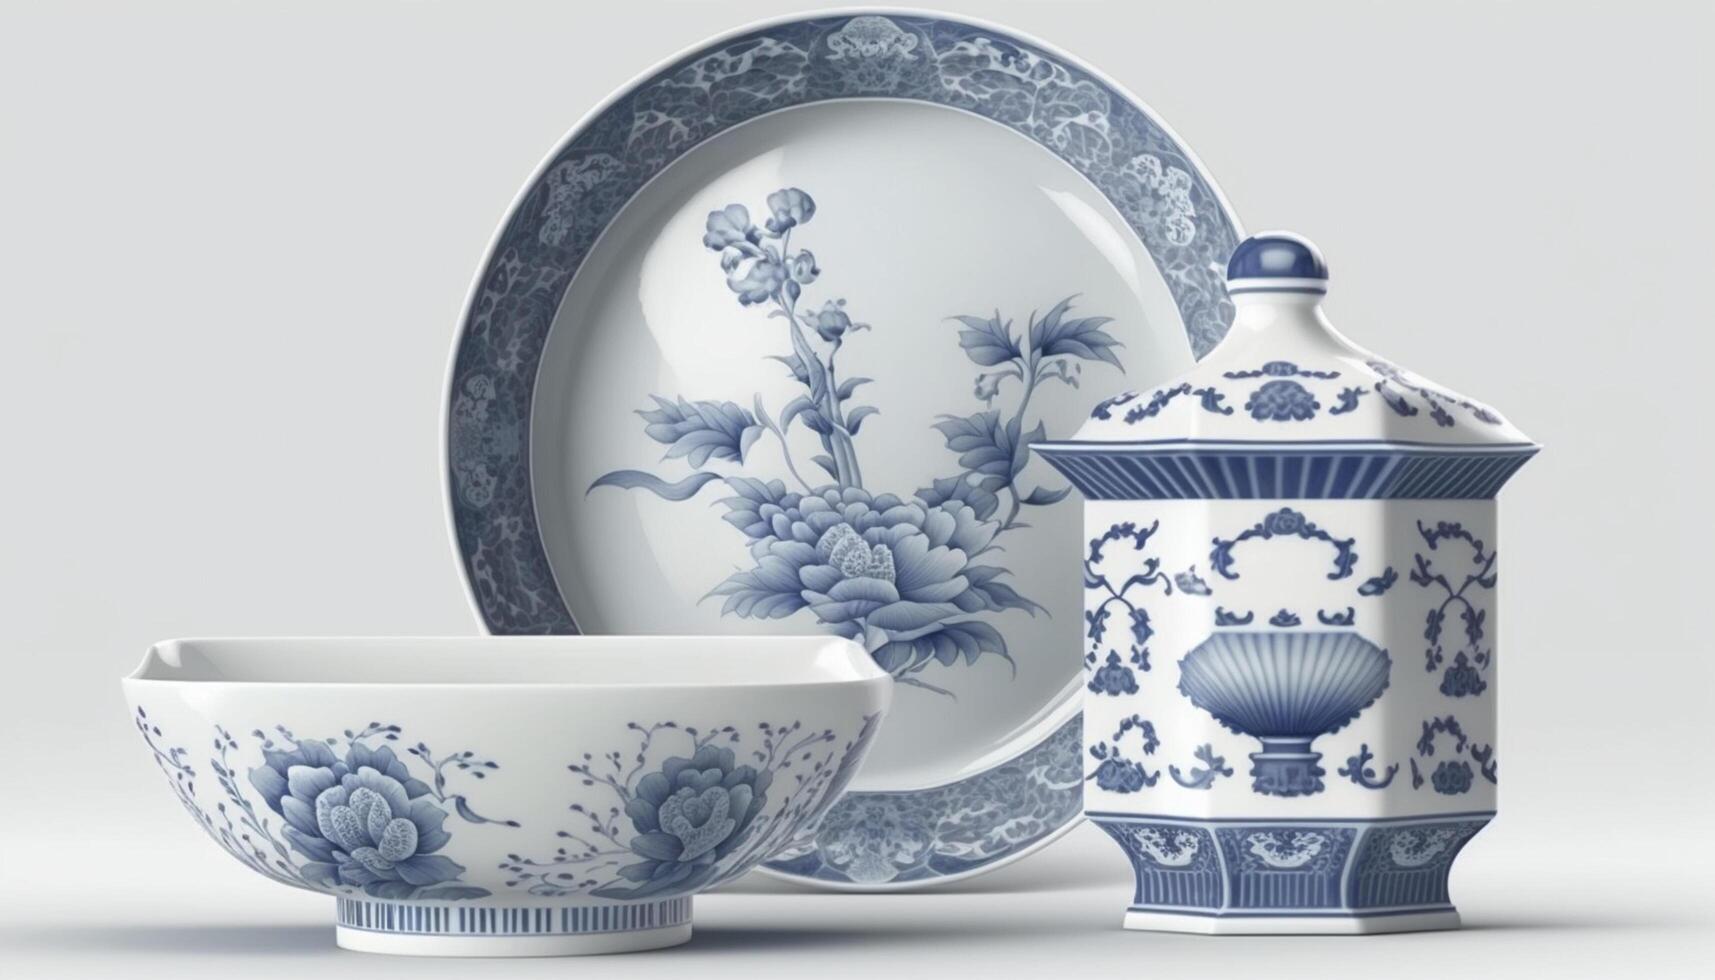 Exquisite Chinese Porcelain on White Background with Intricate Details photo